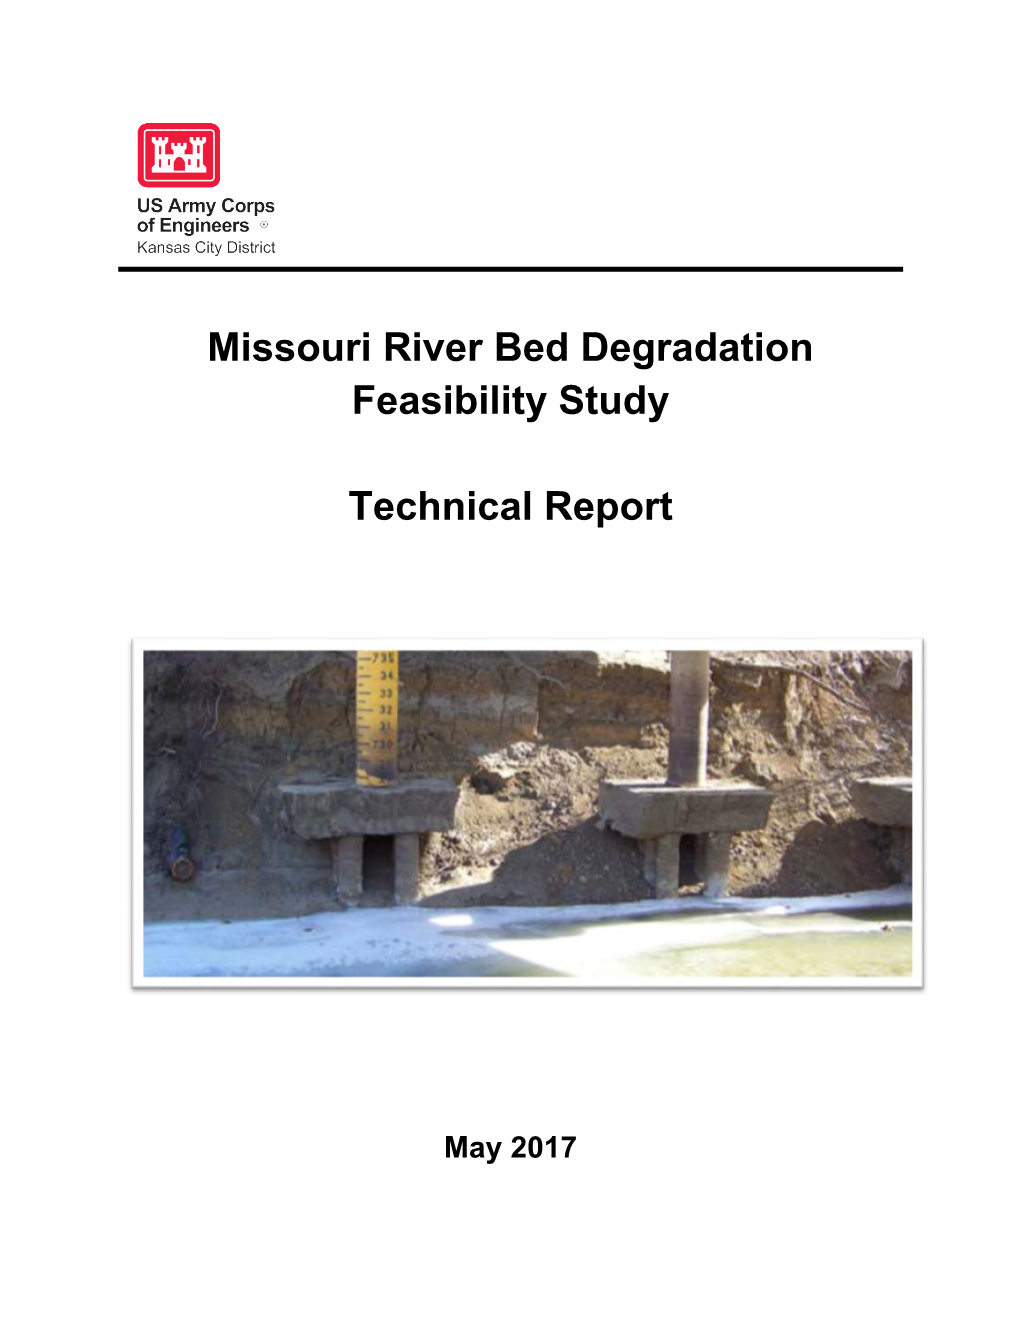 Missouri River Bed Degradation Feasibility Study Technical Report